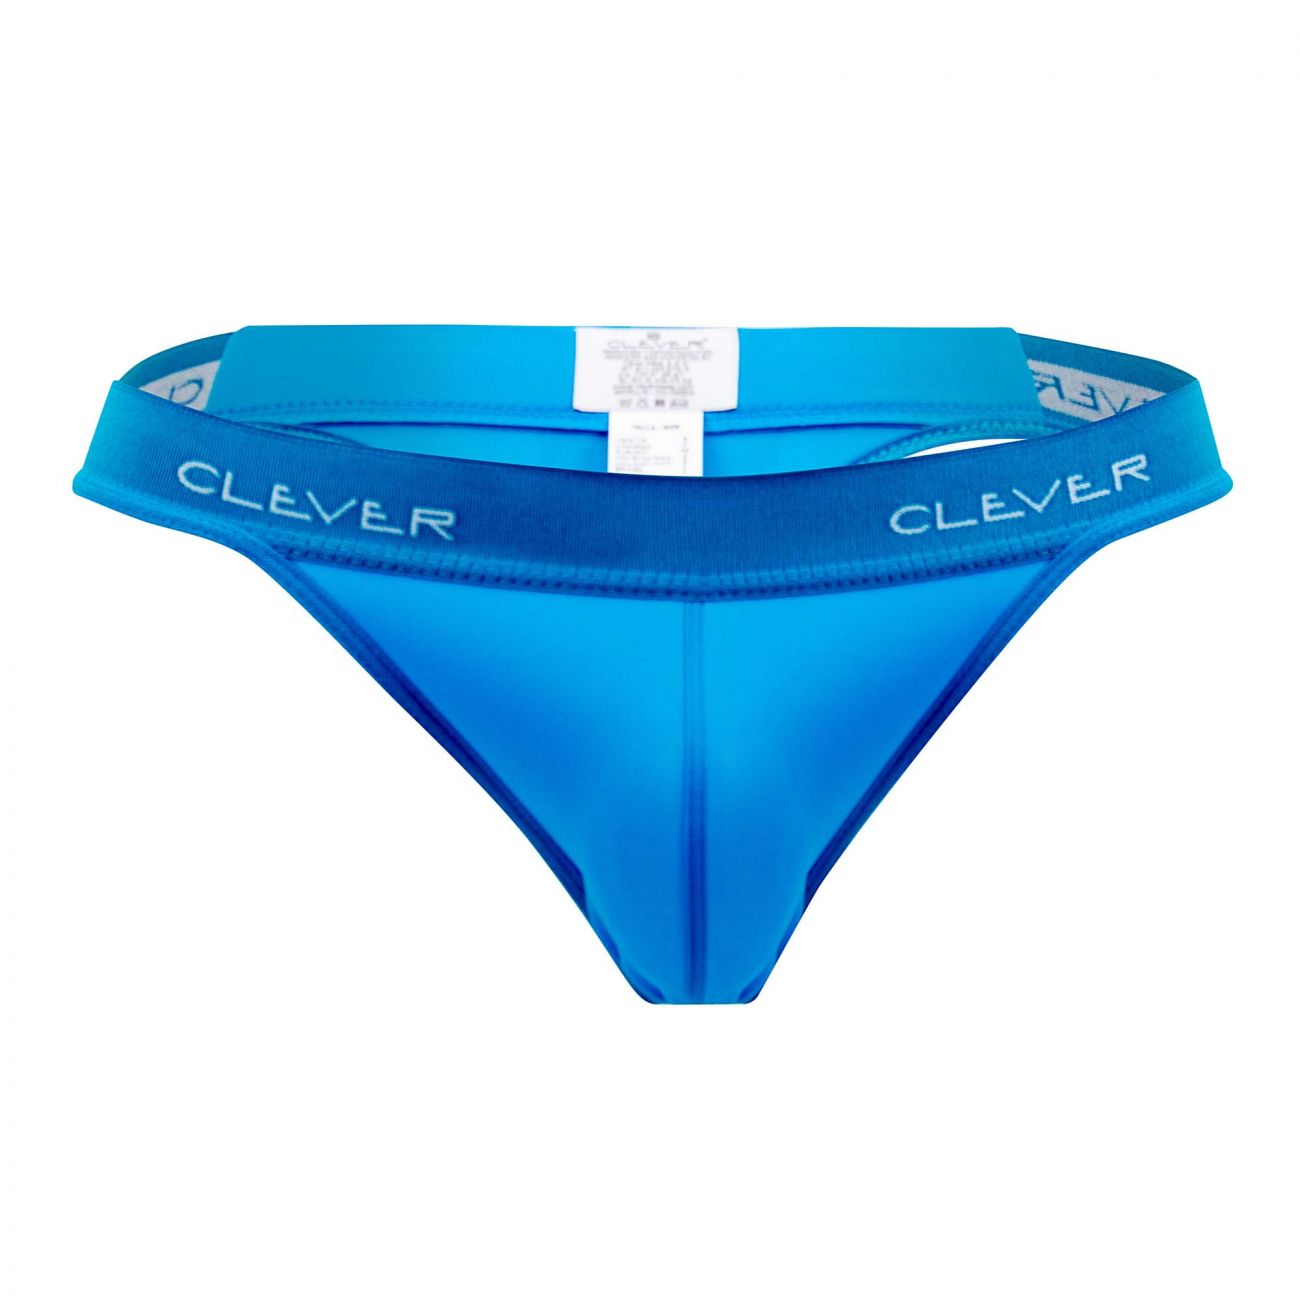 Clever 0590-1 Sky Thongs Blue